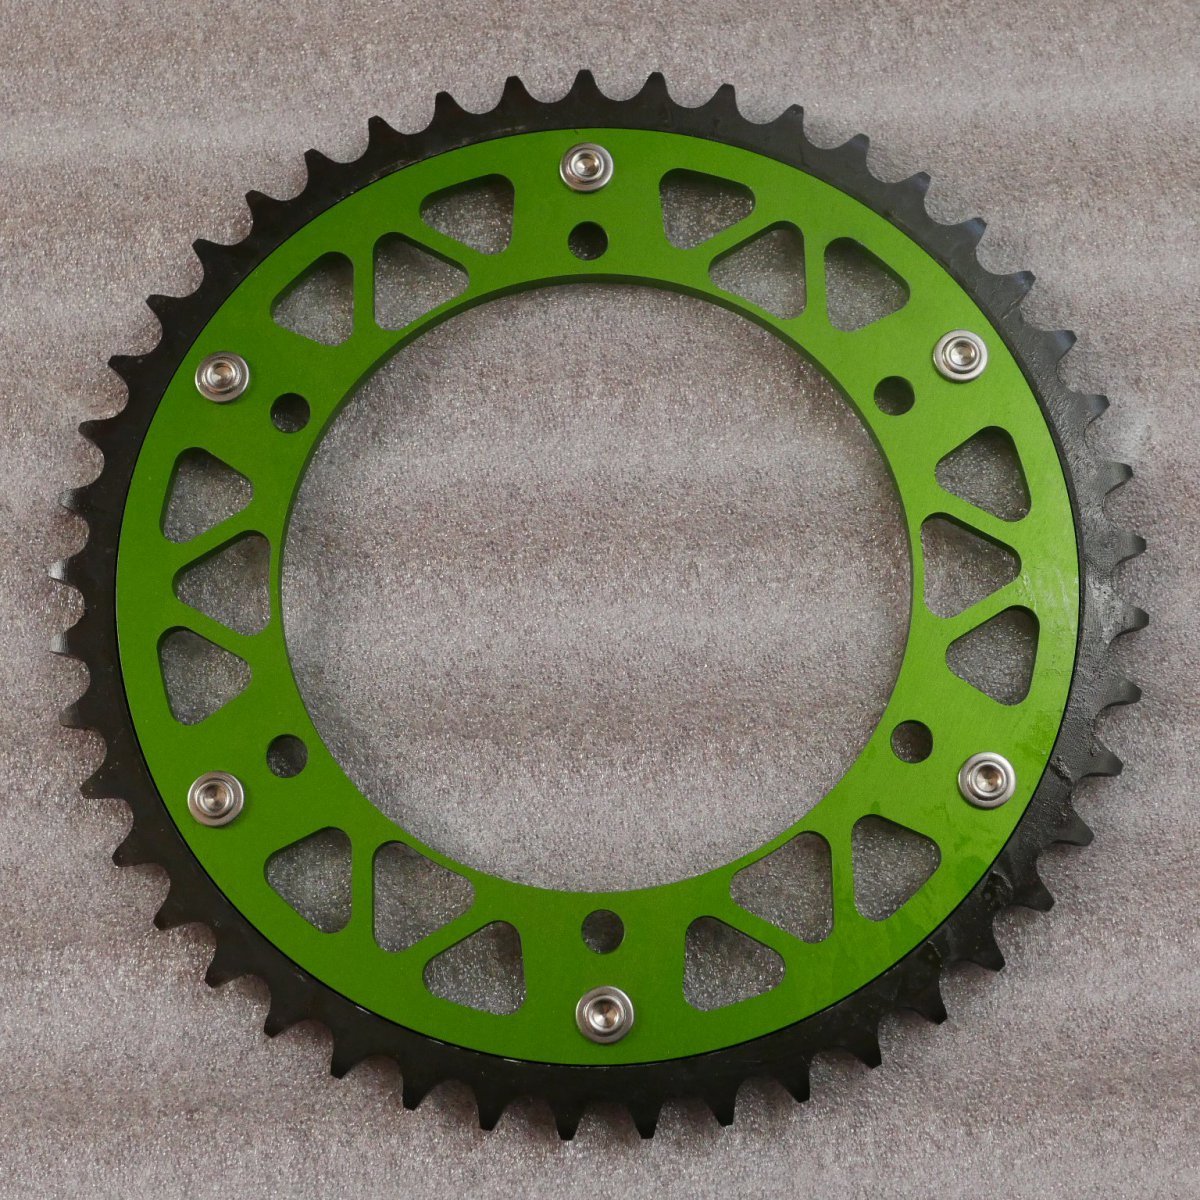 AHL rear sprocket 520-45T iron - aluminium combined type (45 number KX KLX KDX 520 chain for driven sprocket )